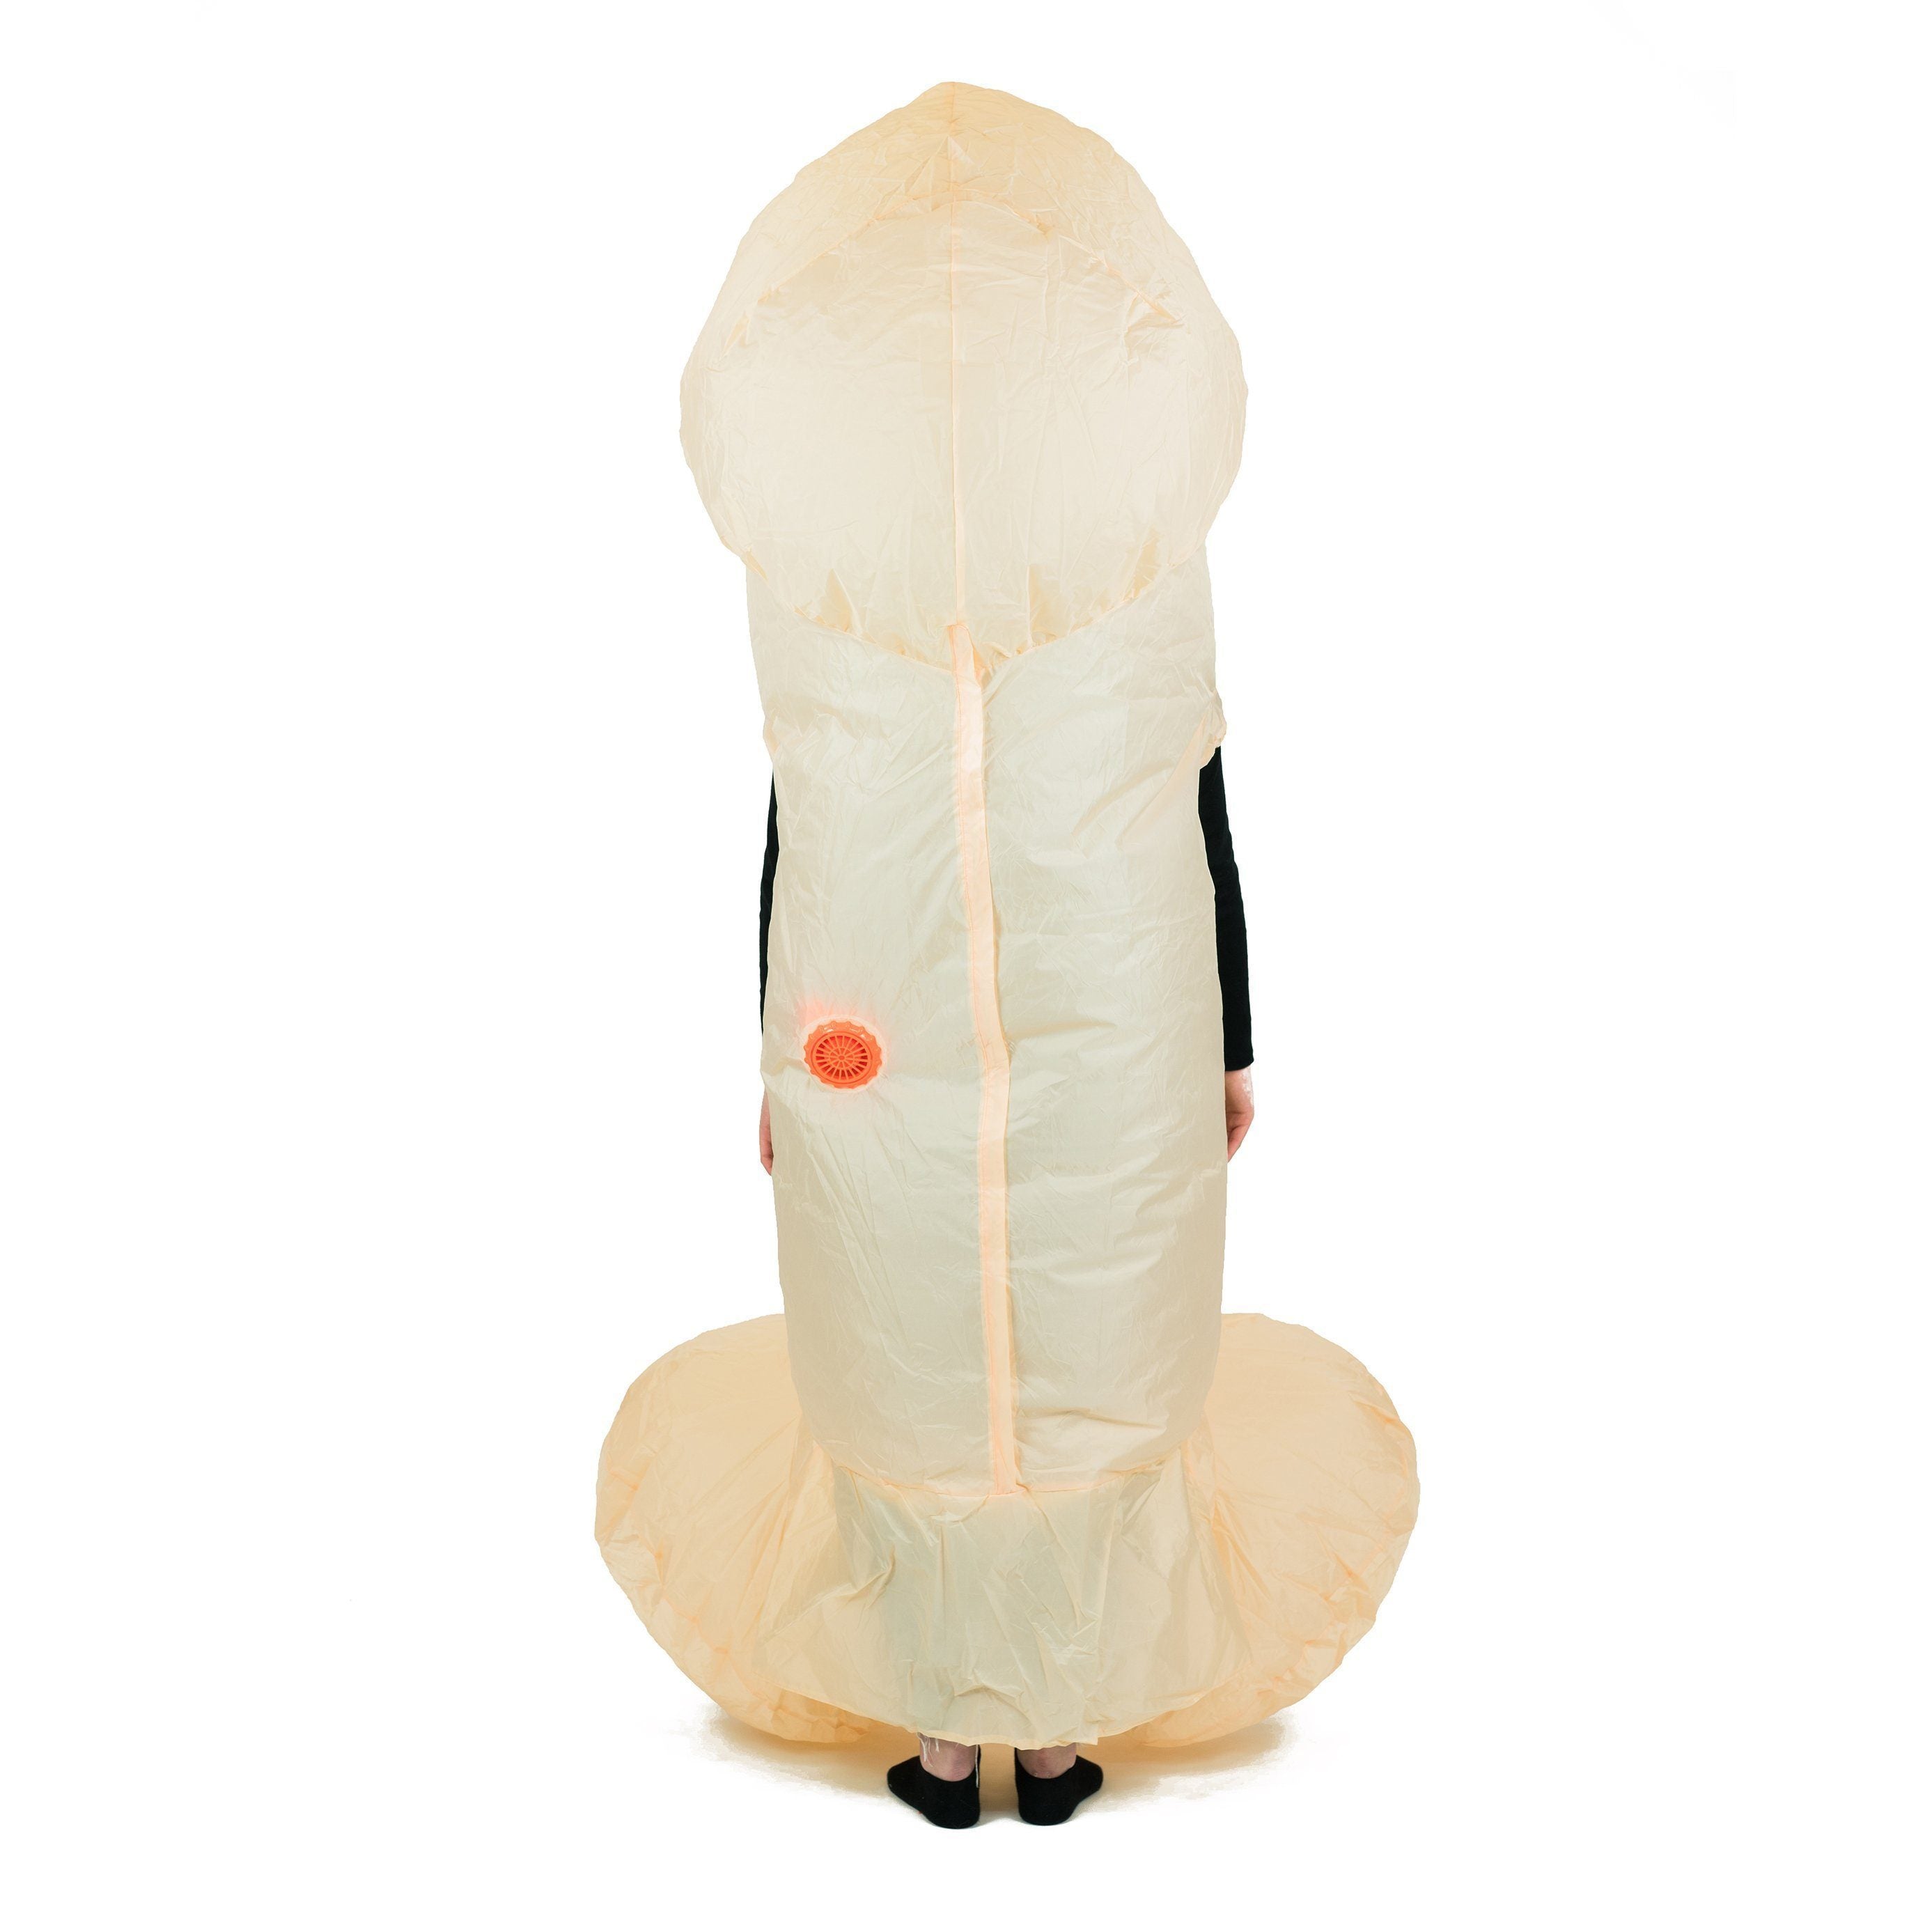 Fancy Dress - White Inflatable Willy Costume